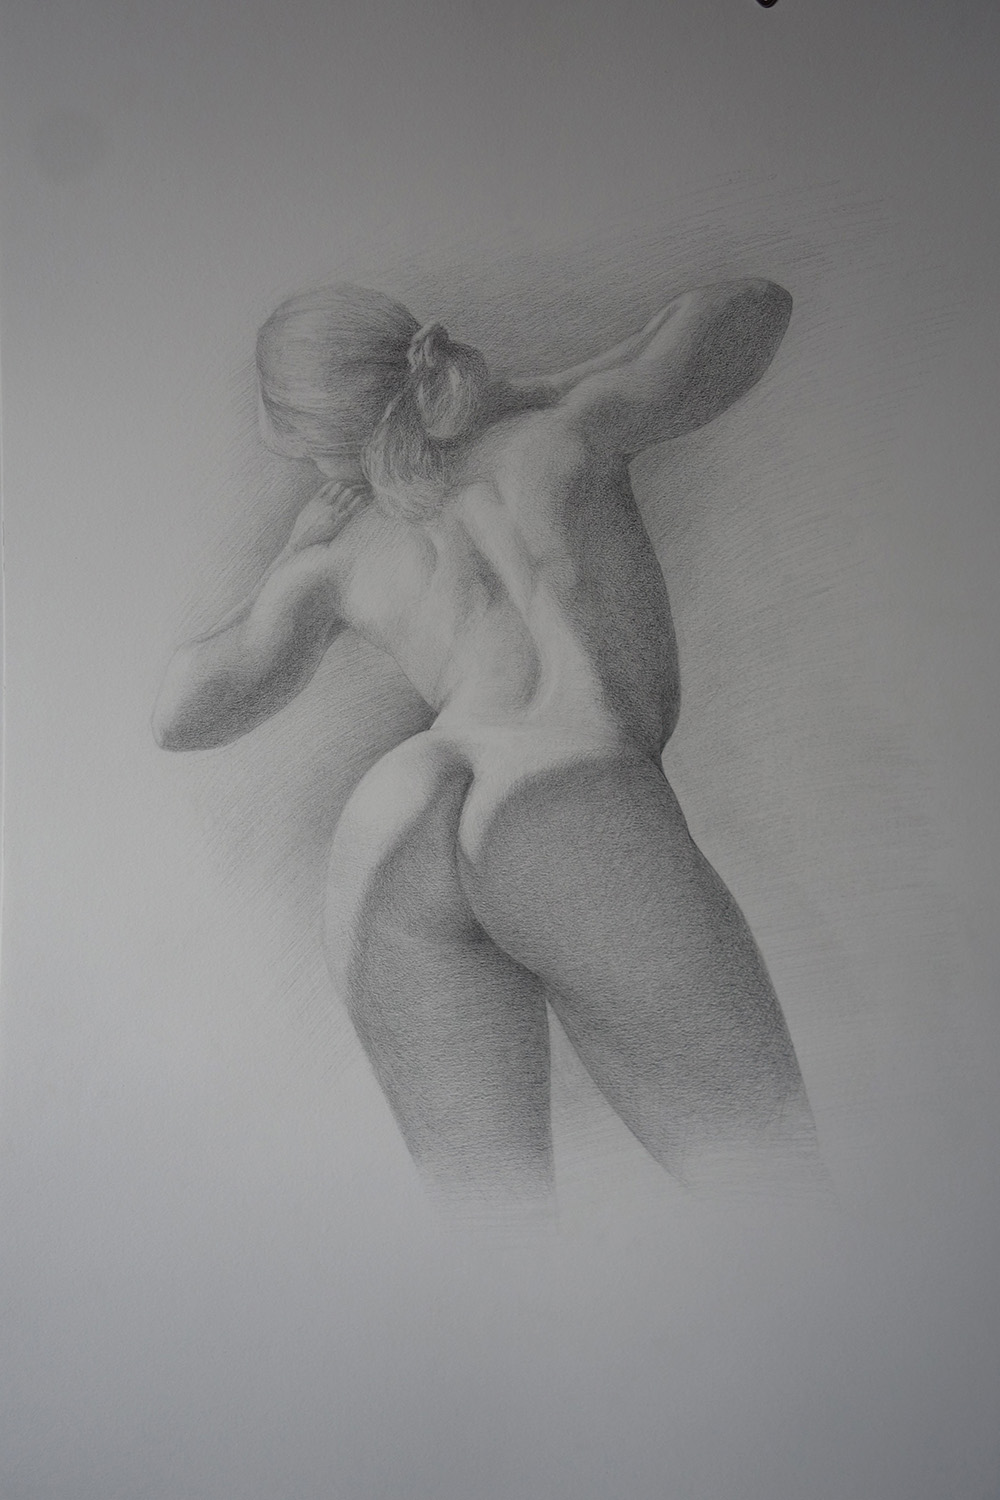 Life drawing of a feamle figure